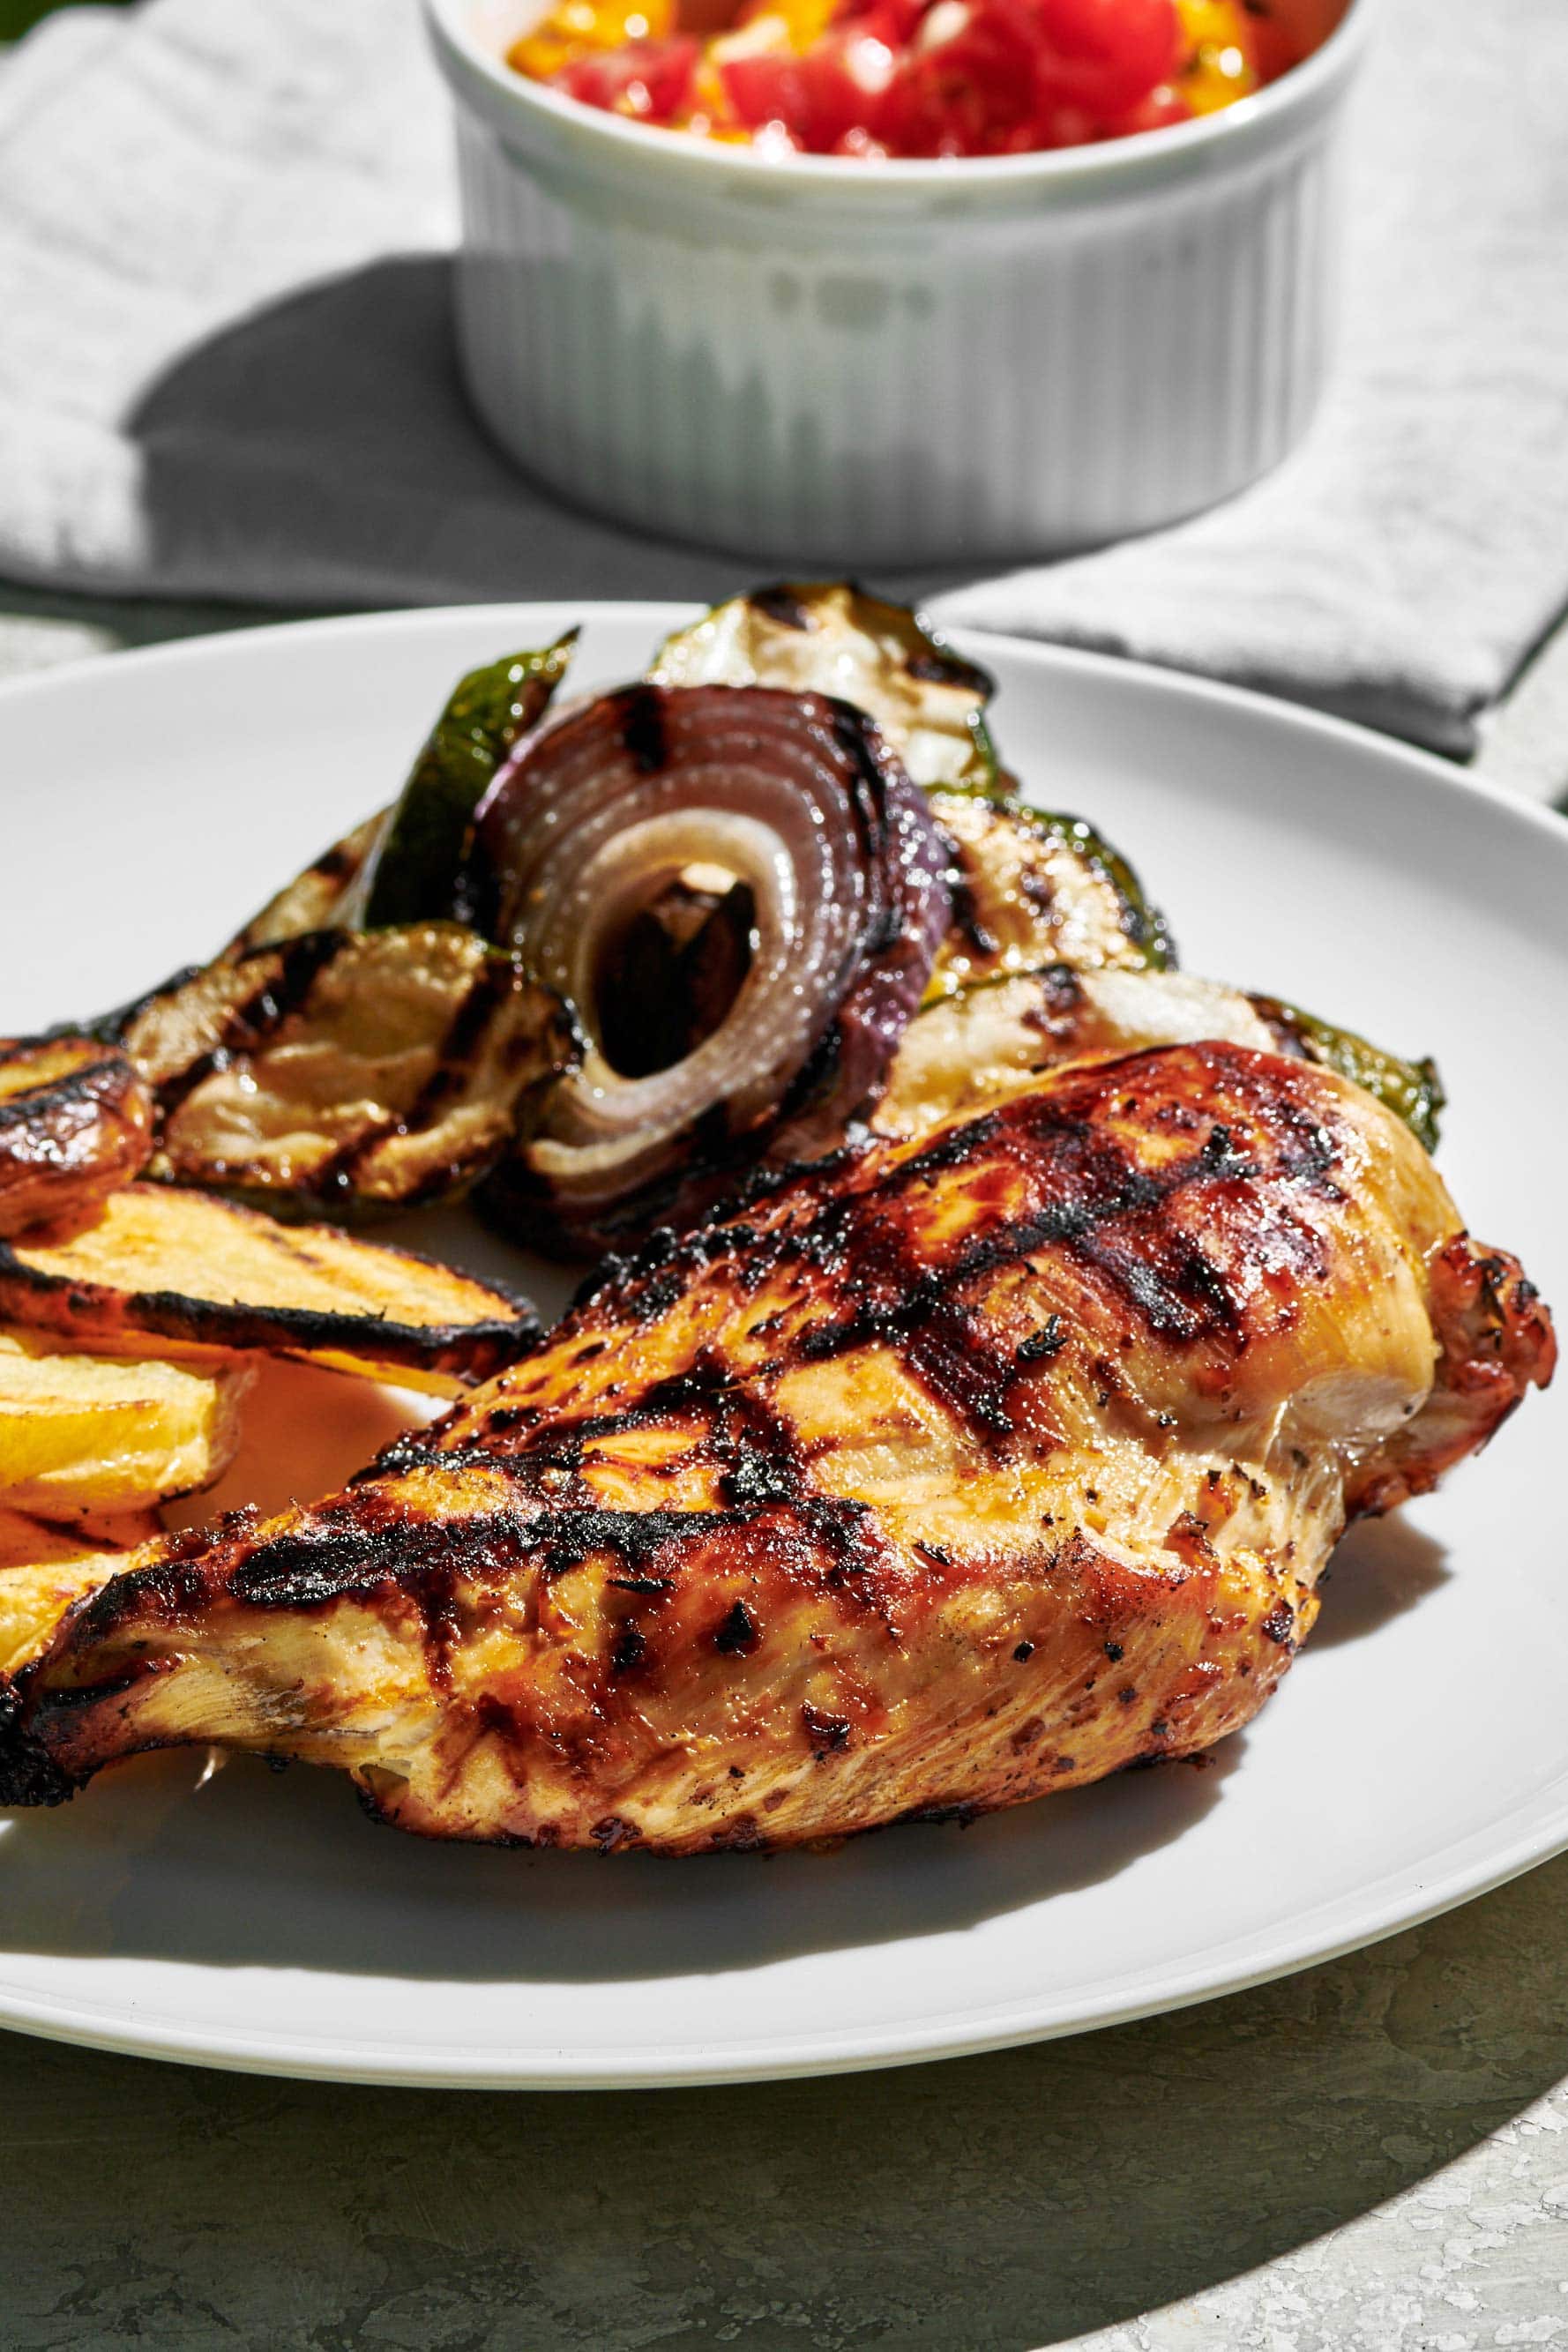 Grilled Chicken Breast on a plate with grilled vegetables.